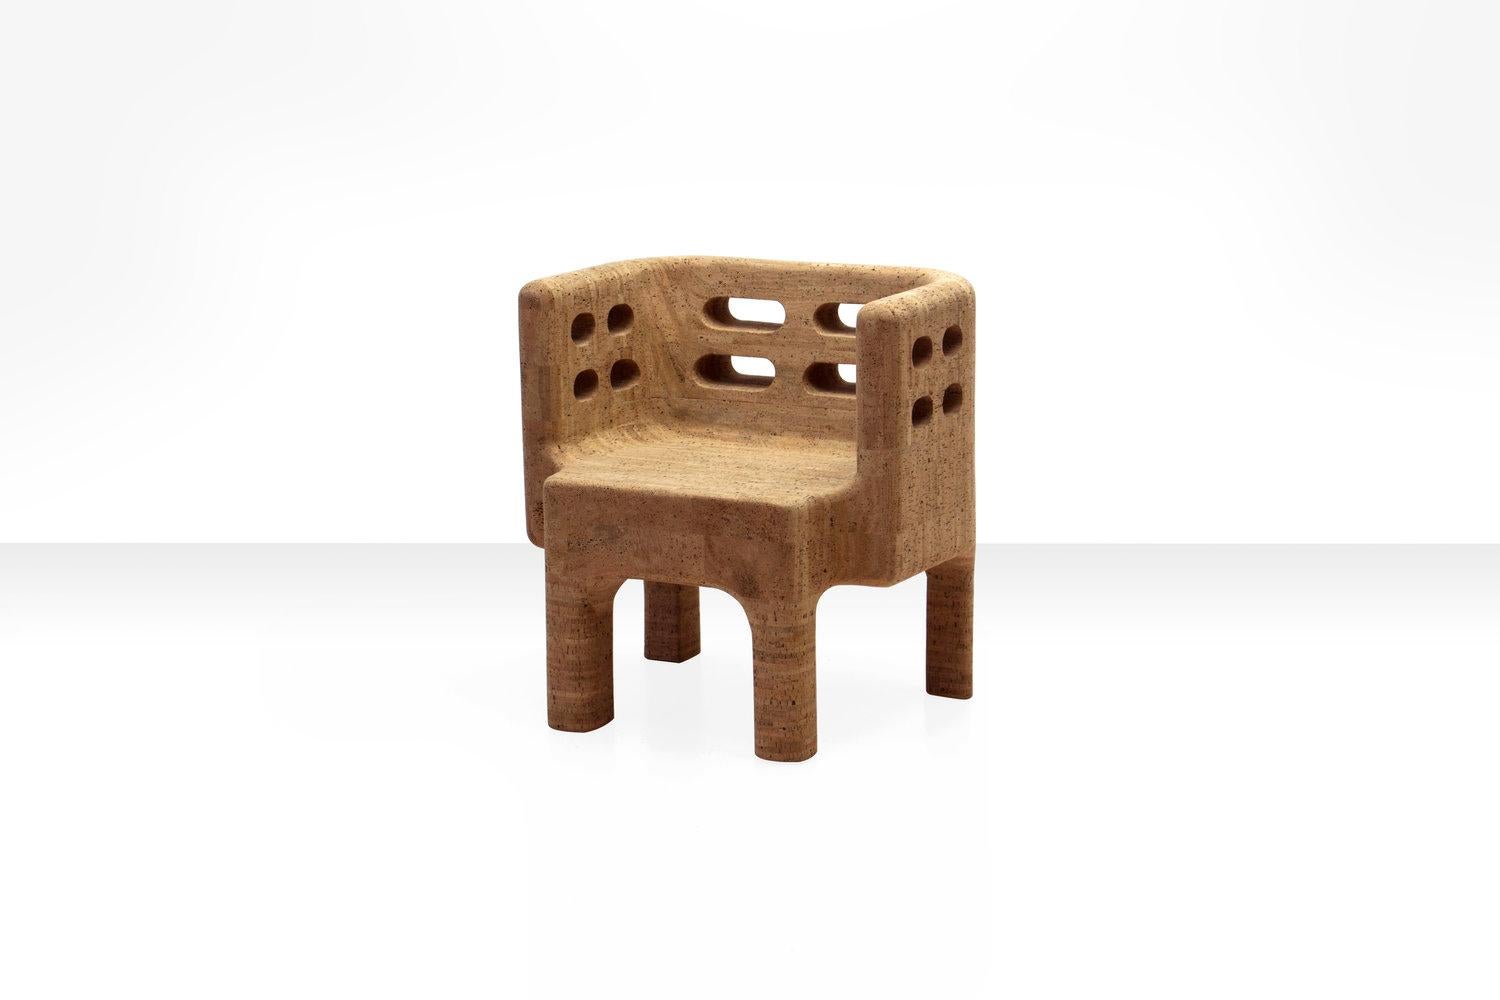 Made in limited edition, this 'Sobreiro' armchair is nr 1 of 150 and part of a small exclusive collection of cork furniture designed by the Campana Brothers. 

The Campana brothers who are well known for their playful designs and use of exceptional